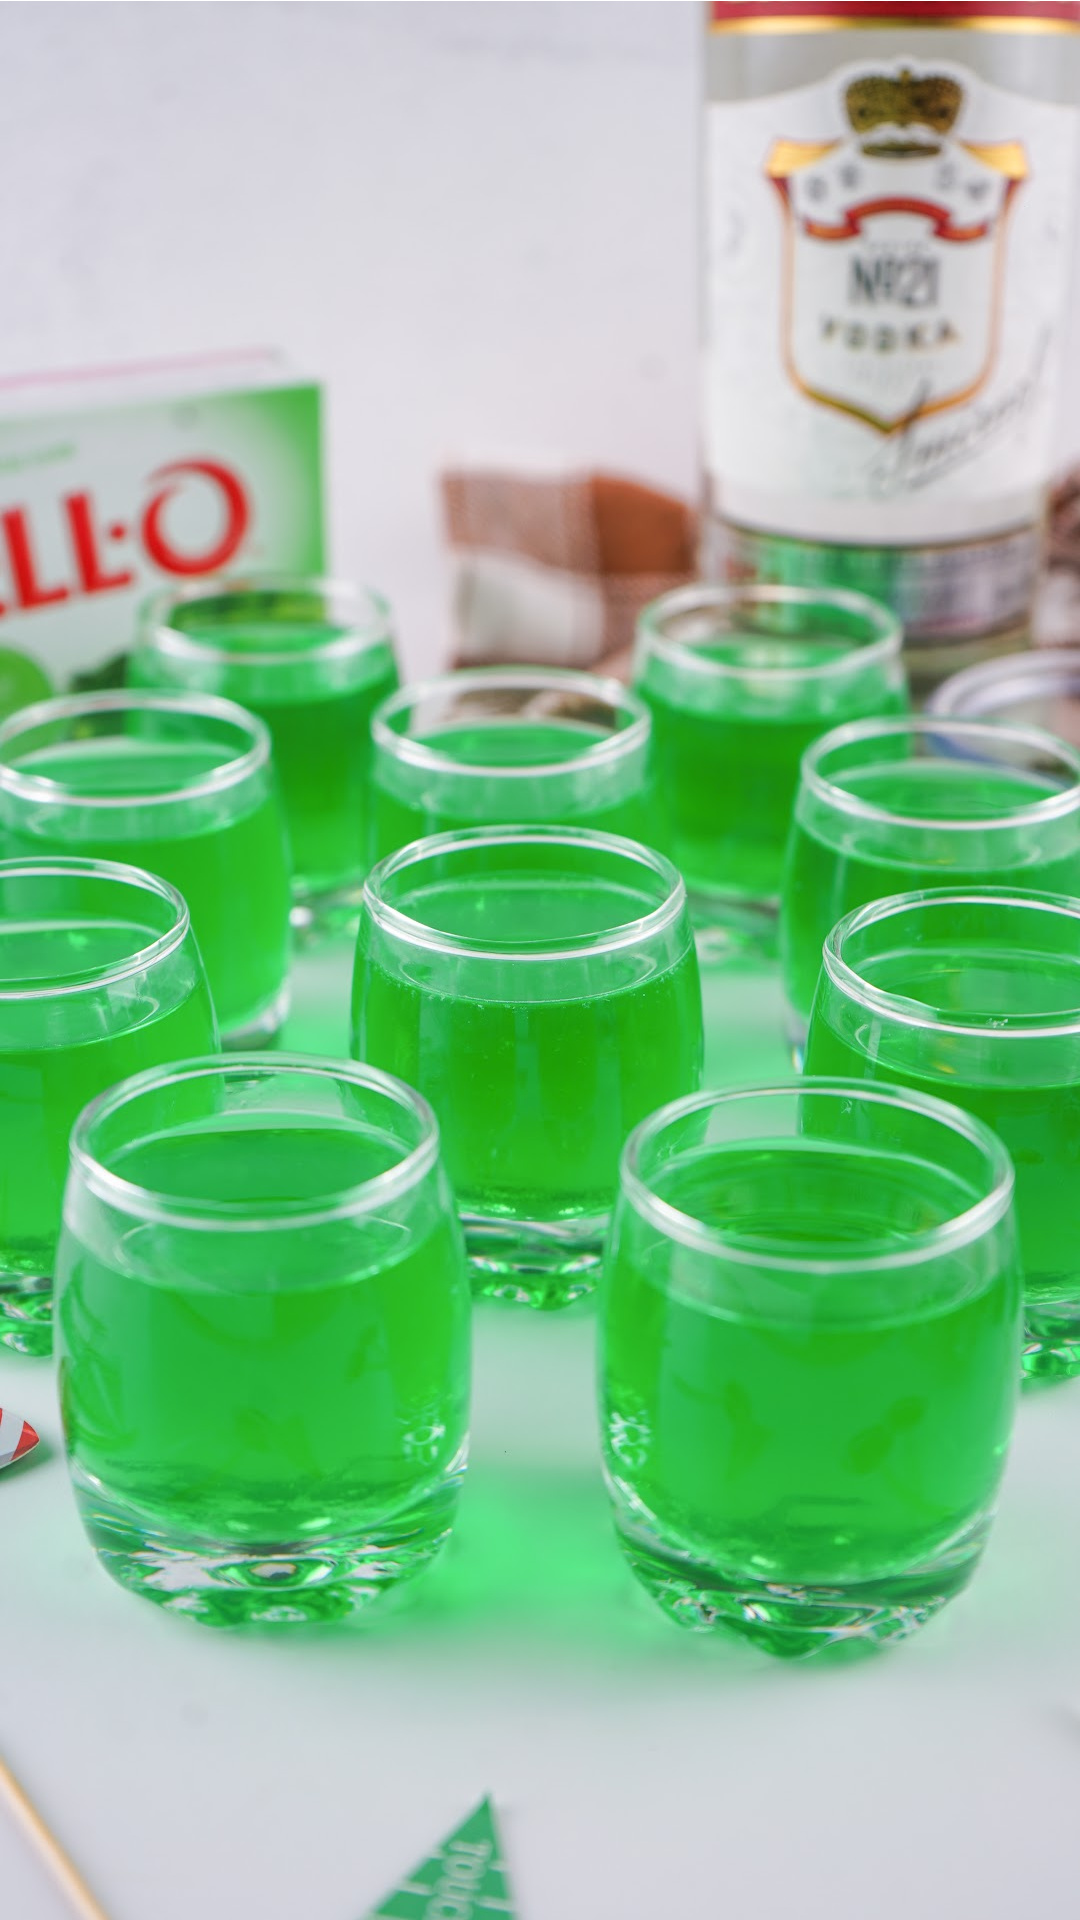 How to make Green jello shots topped with whipped cream with brown and green sprinkles and football toppers. The perfect game day football jello shots!